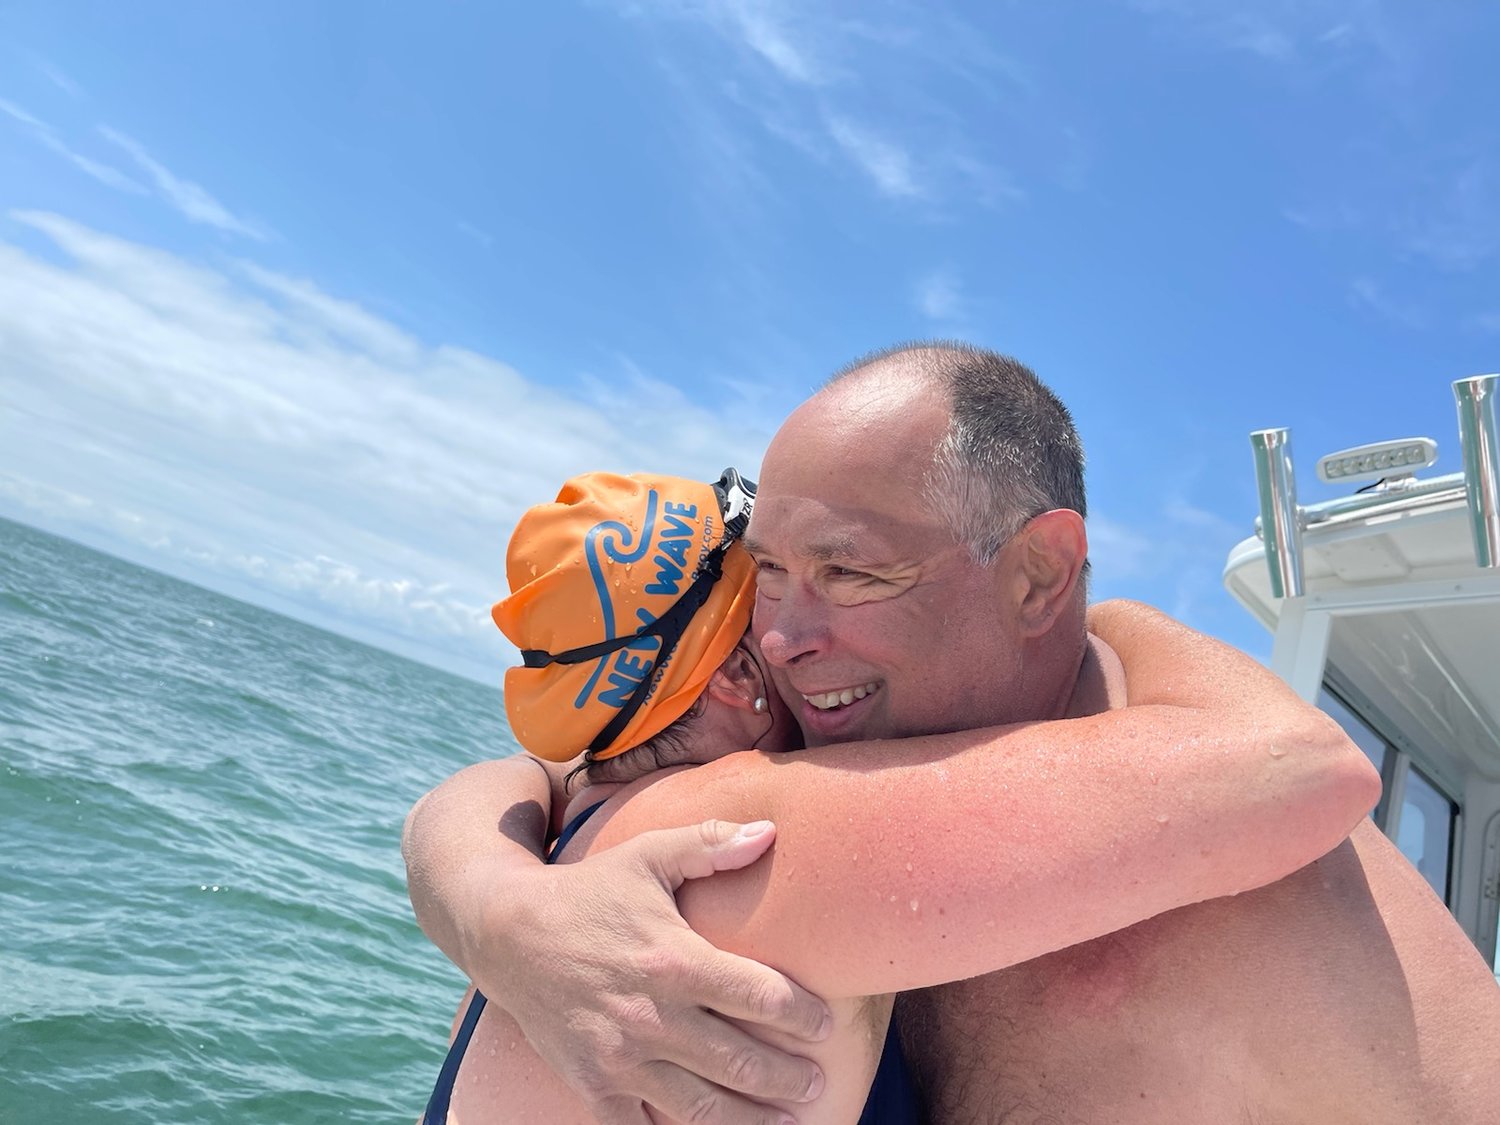 Deb Blair, the last person to complete a swim from island to island, in 2000, gives Doug McConnell a hug after he ended his swim..